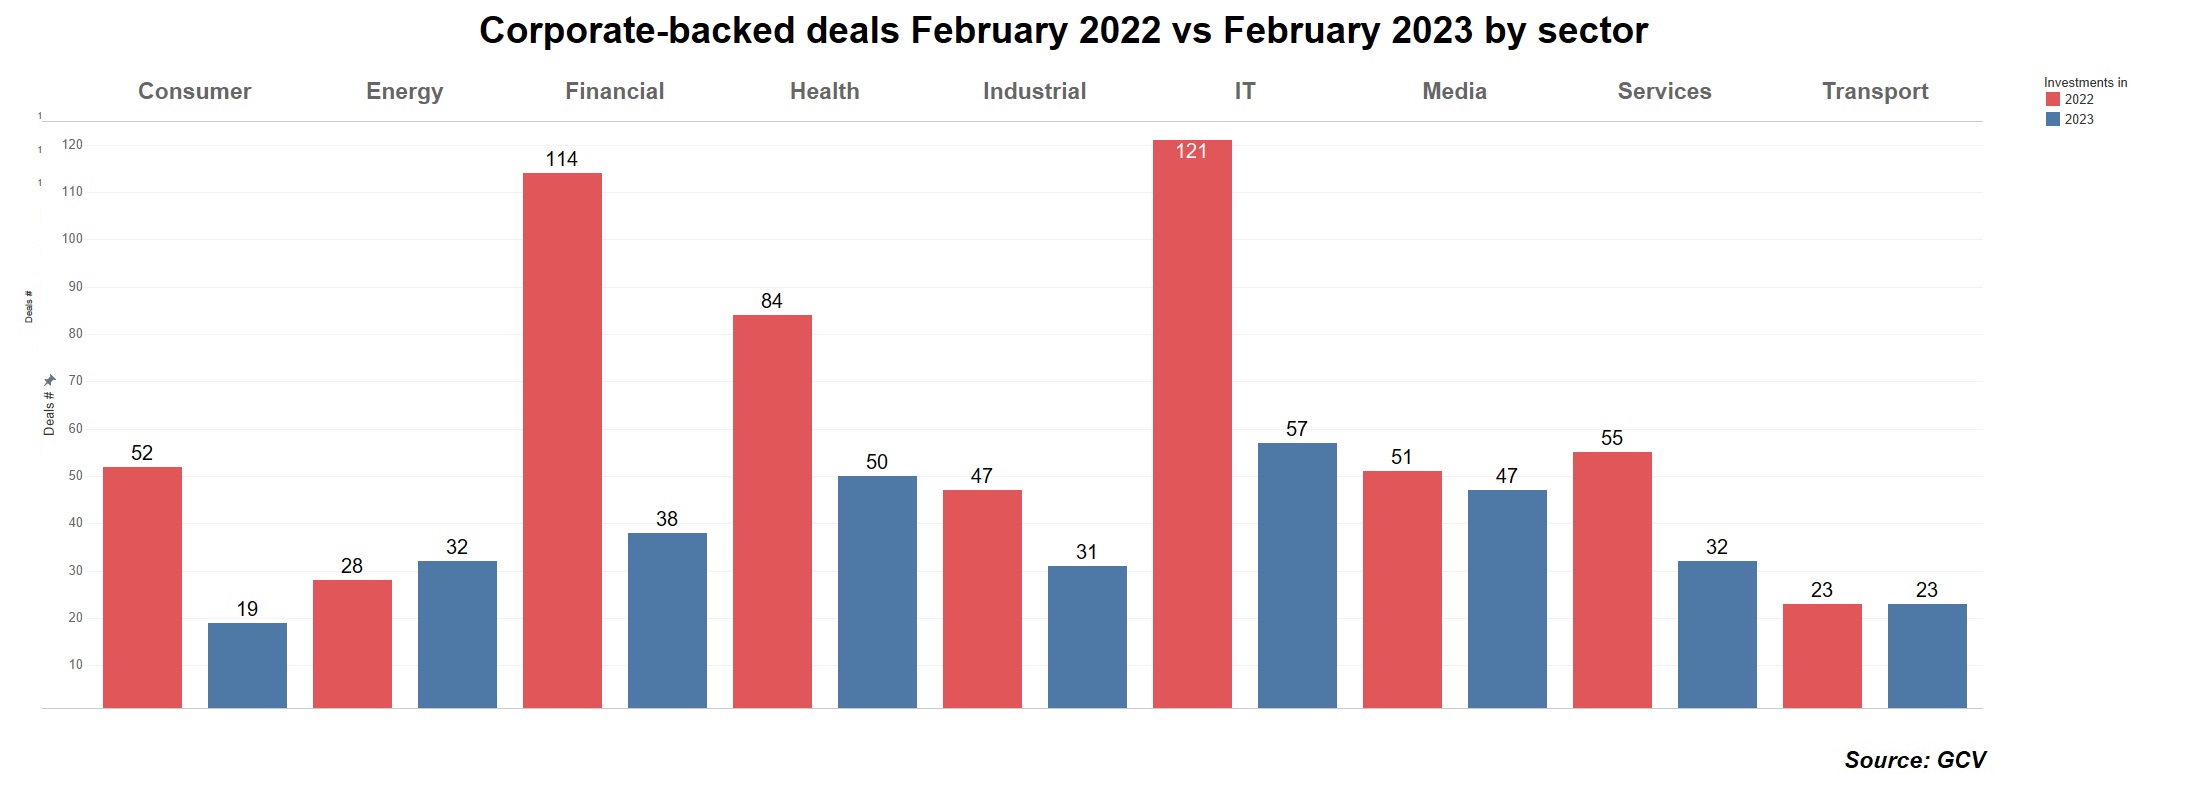 Bar chart with corporate-backed deals February 2022 vs February 2023 by sector. Source: GCV